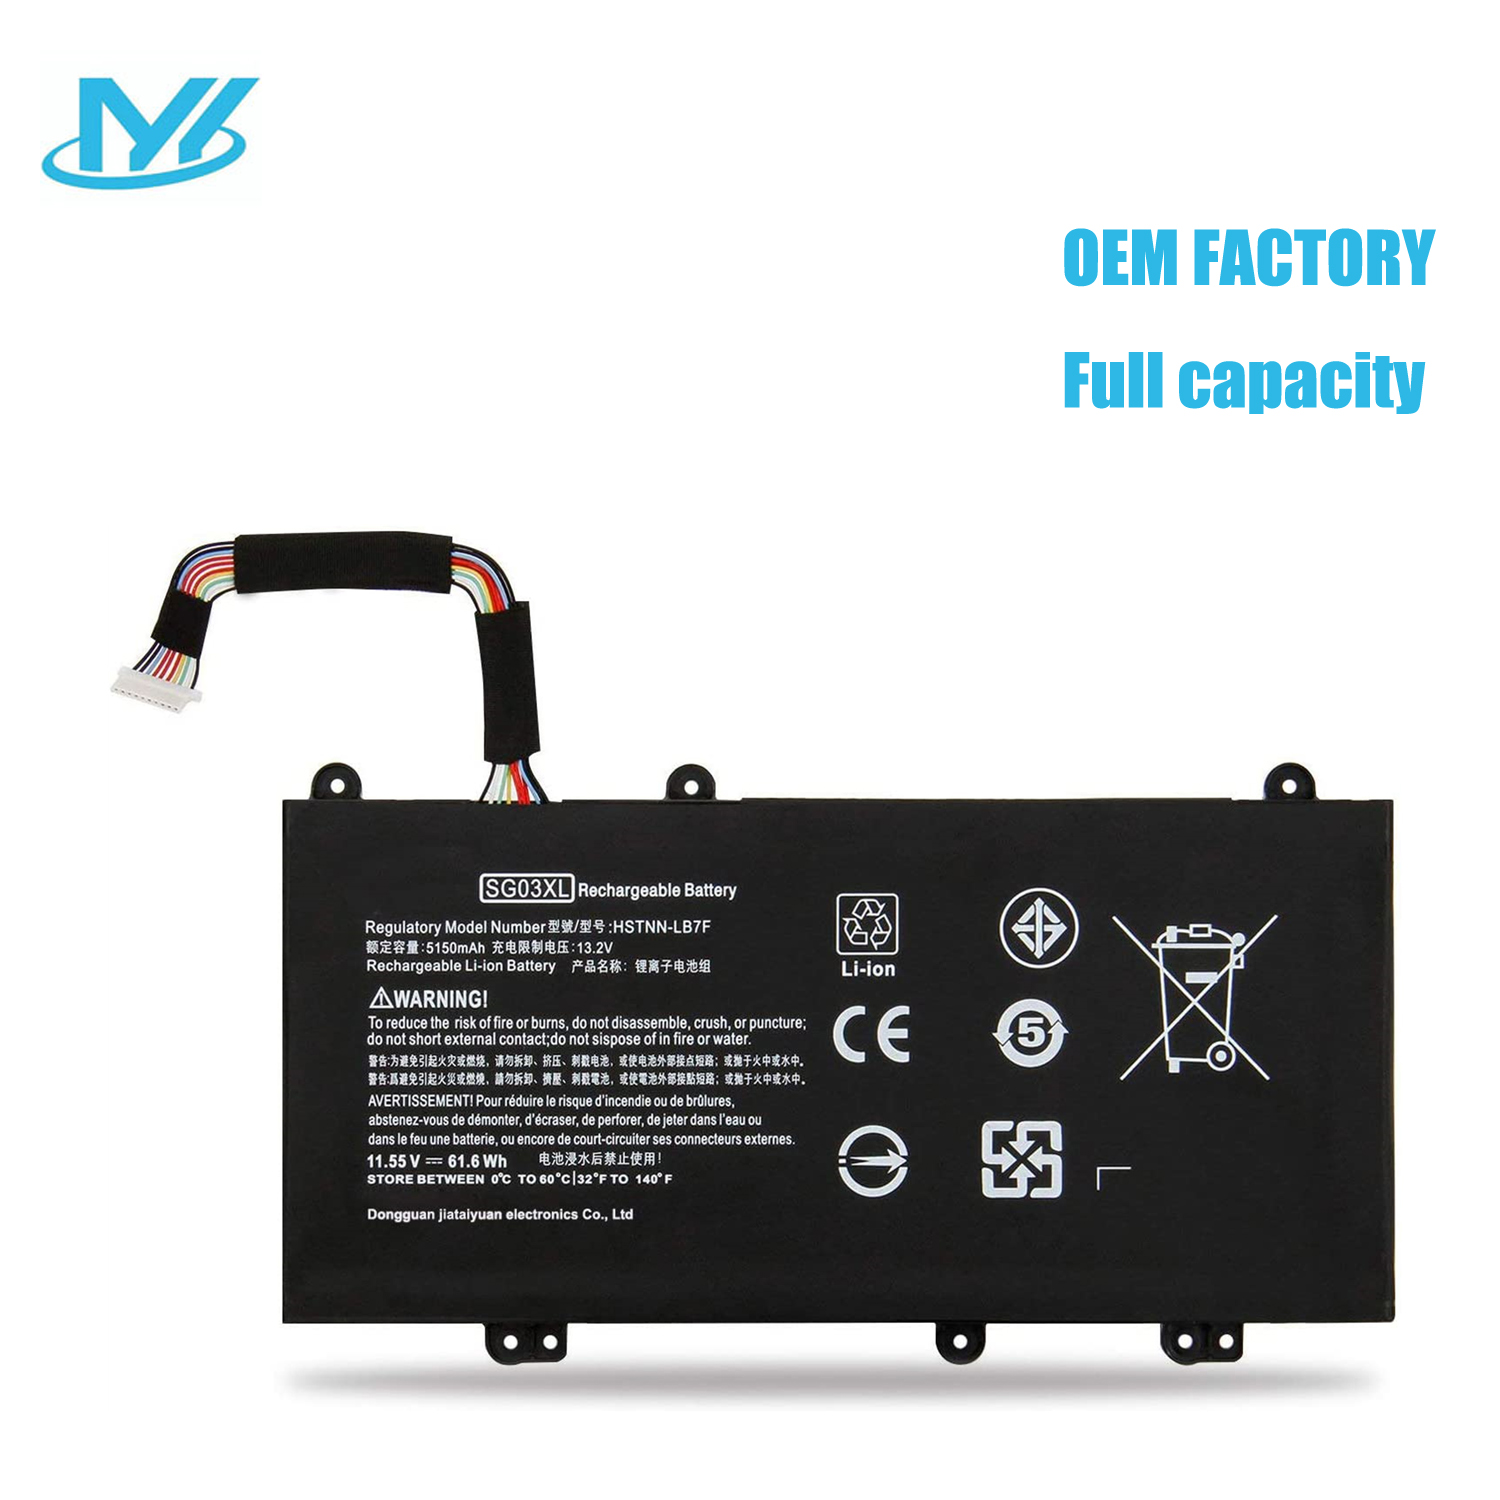 SG03XL rechargeable lithium ion Notebook battery Laptop battery For HP Envy M7U M7-U009DX 11.55V 61.6Wh